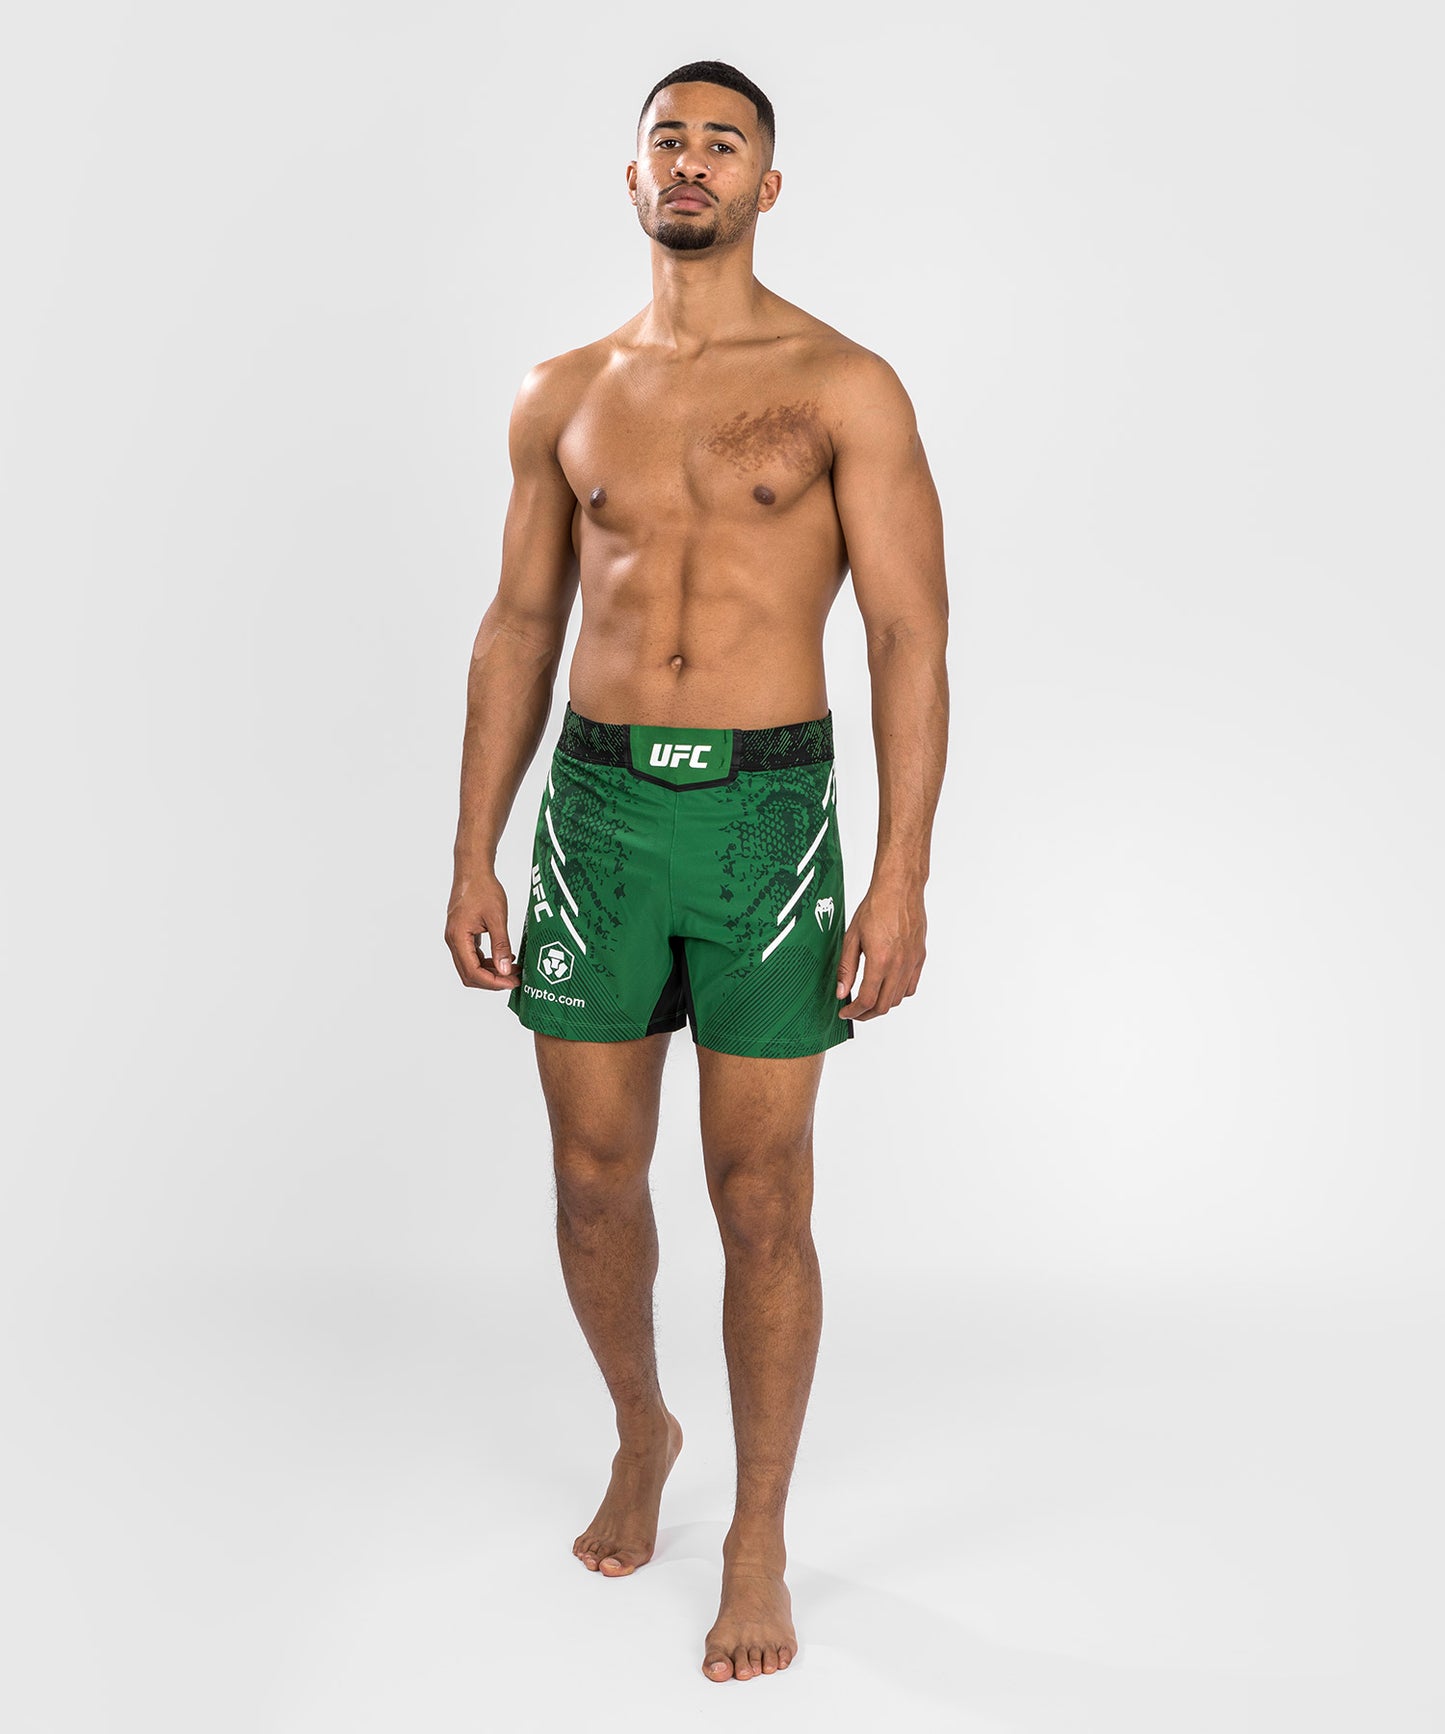 UFC Adrenaline by Venum Personalized Authentic Fight Night Men's Fight Short - Short Fit - Green